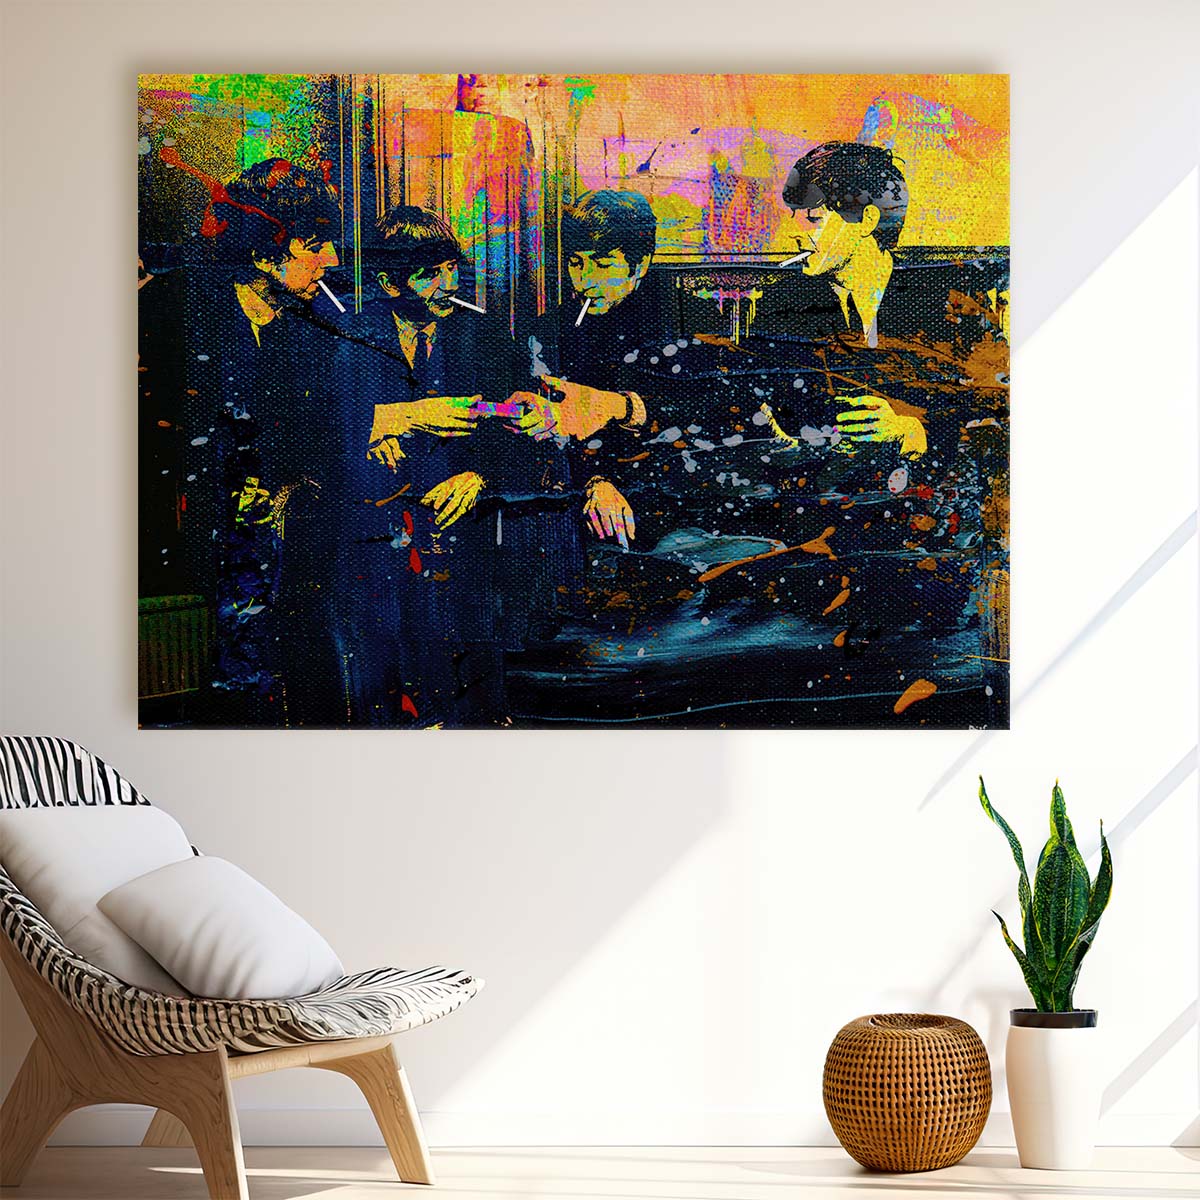 Smoking Beatles Graffiti Wall Art by Luxuriance Designs. Made in USA.